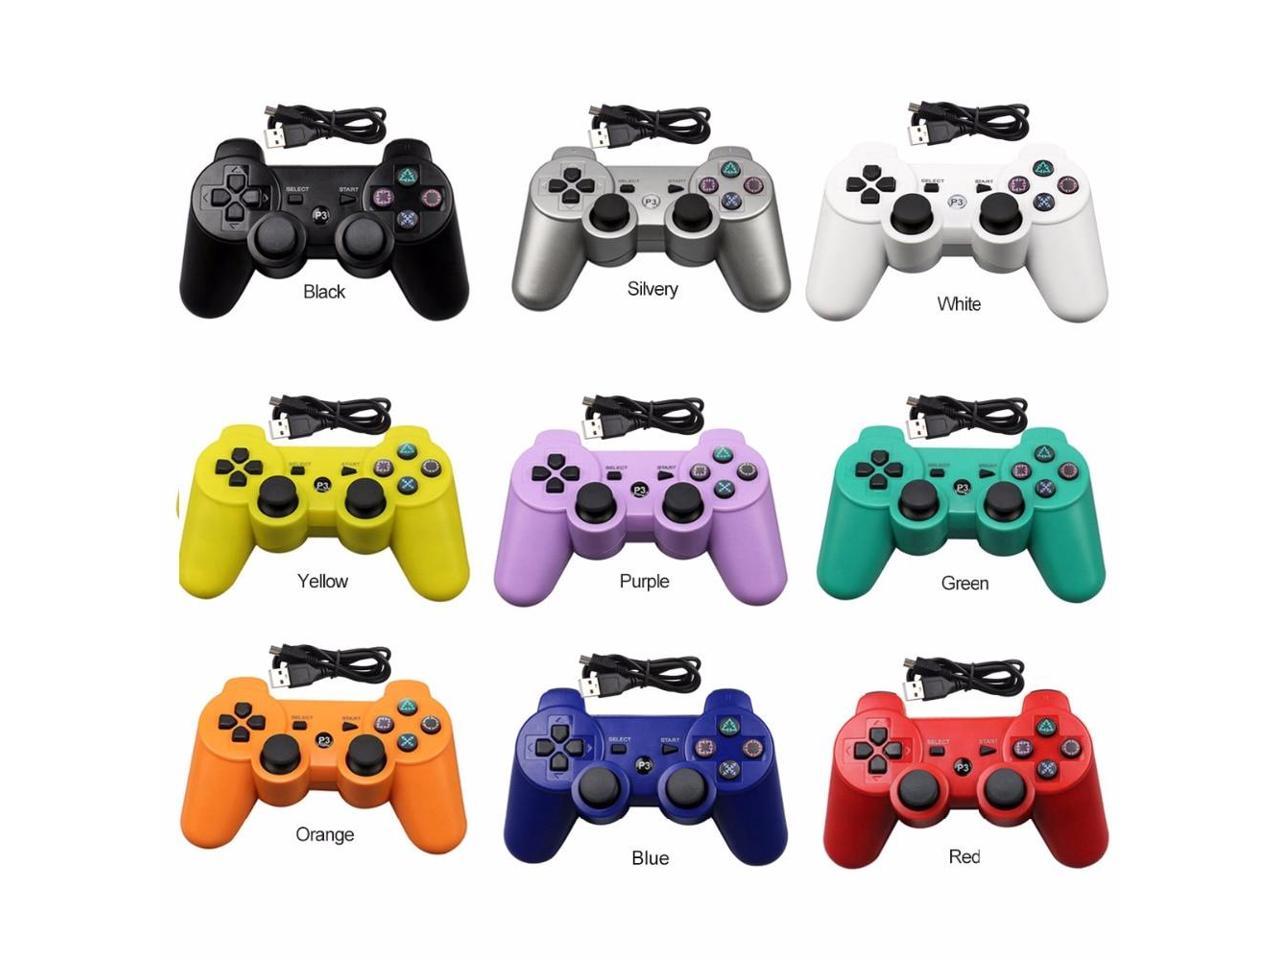 USB Wired Controller For PS3 Gamepad for Play Station 3 usb Joystick gamepad Console for SONY Playstation 3 Controle Gamepad